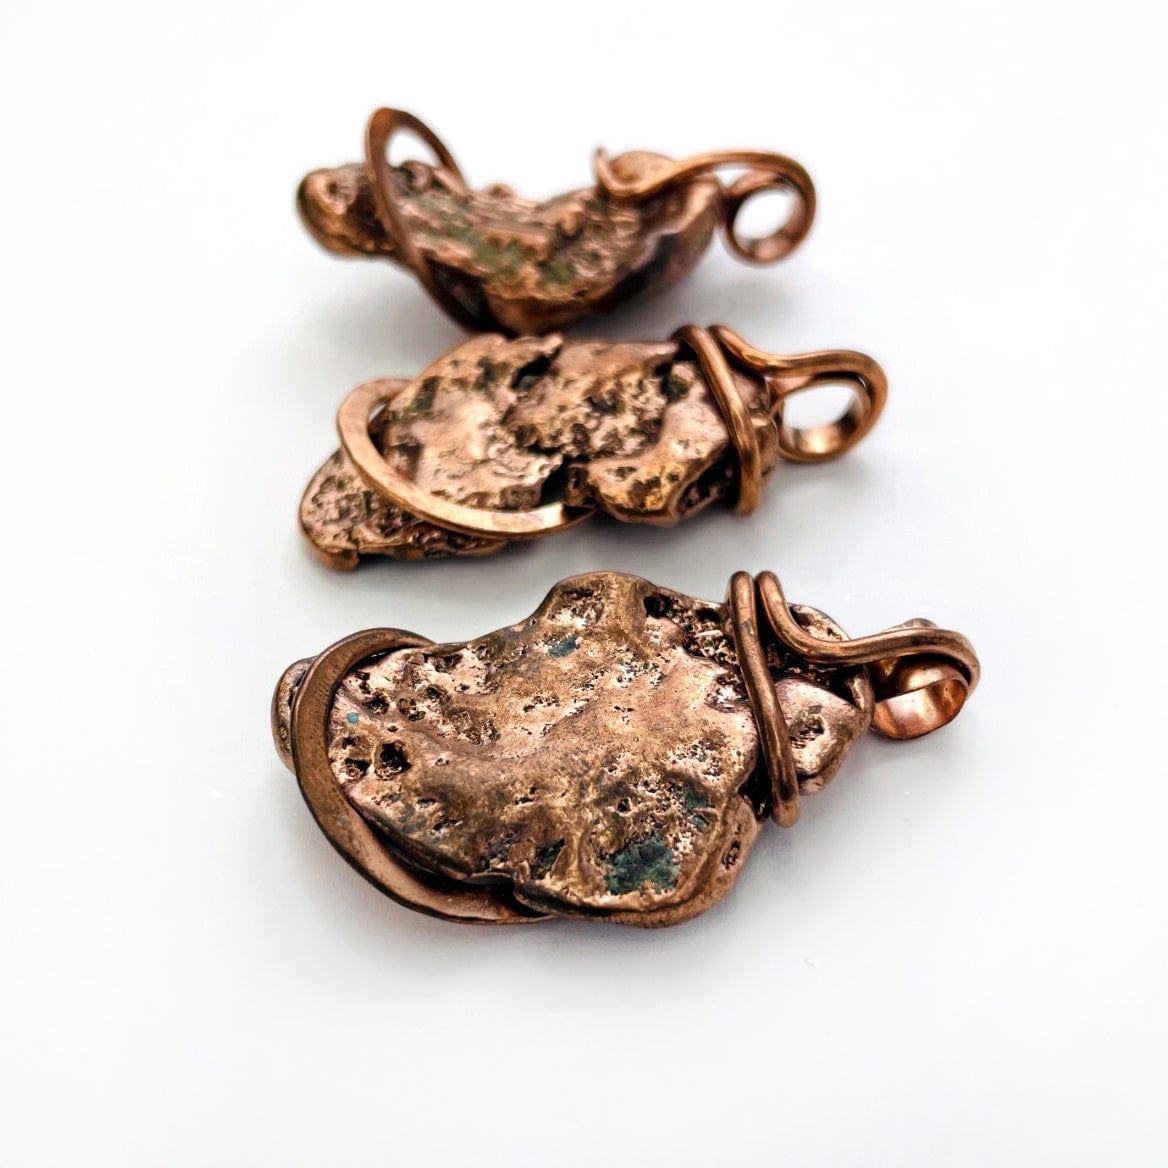 3 Copper Nugget freeform pendants from angle showing thickness and details